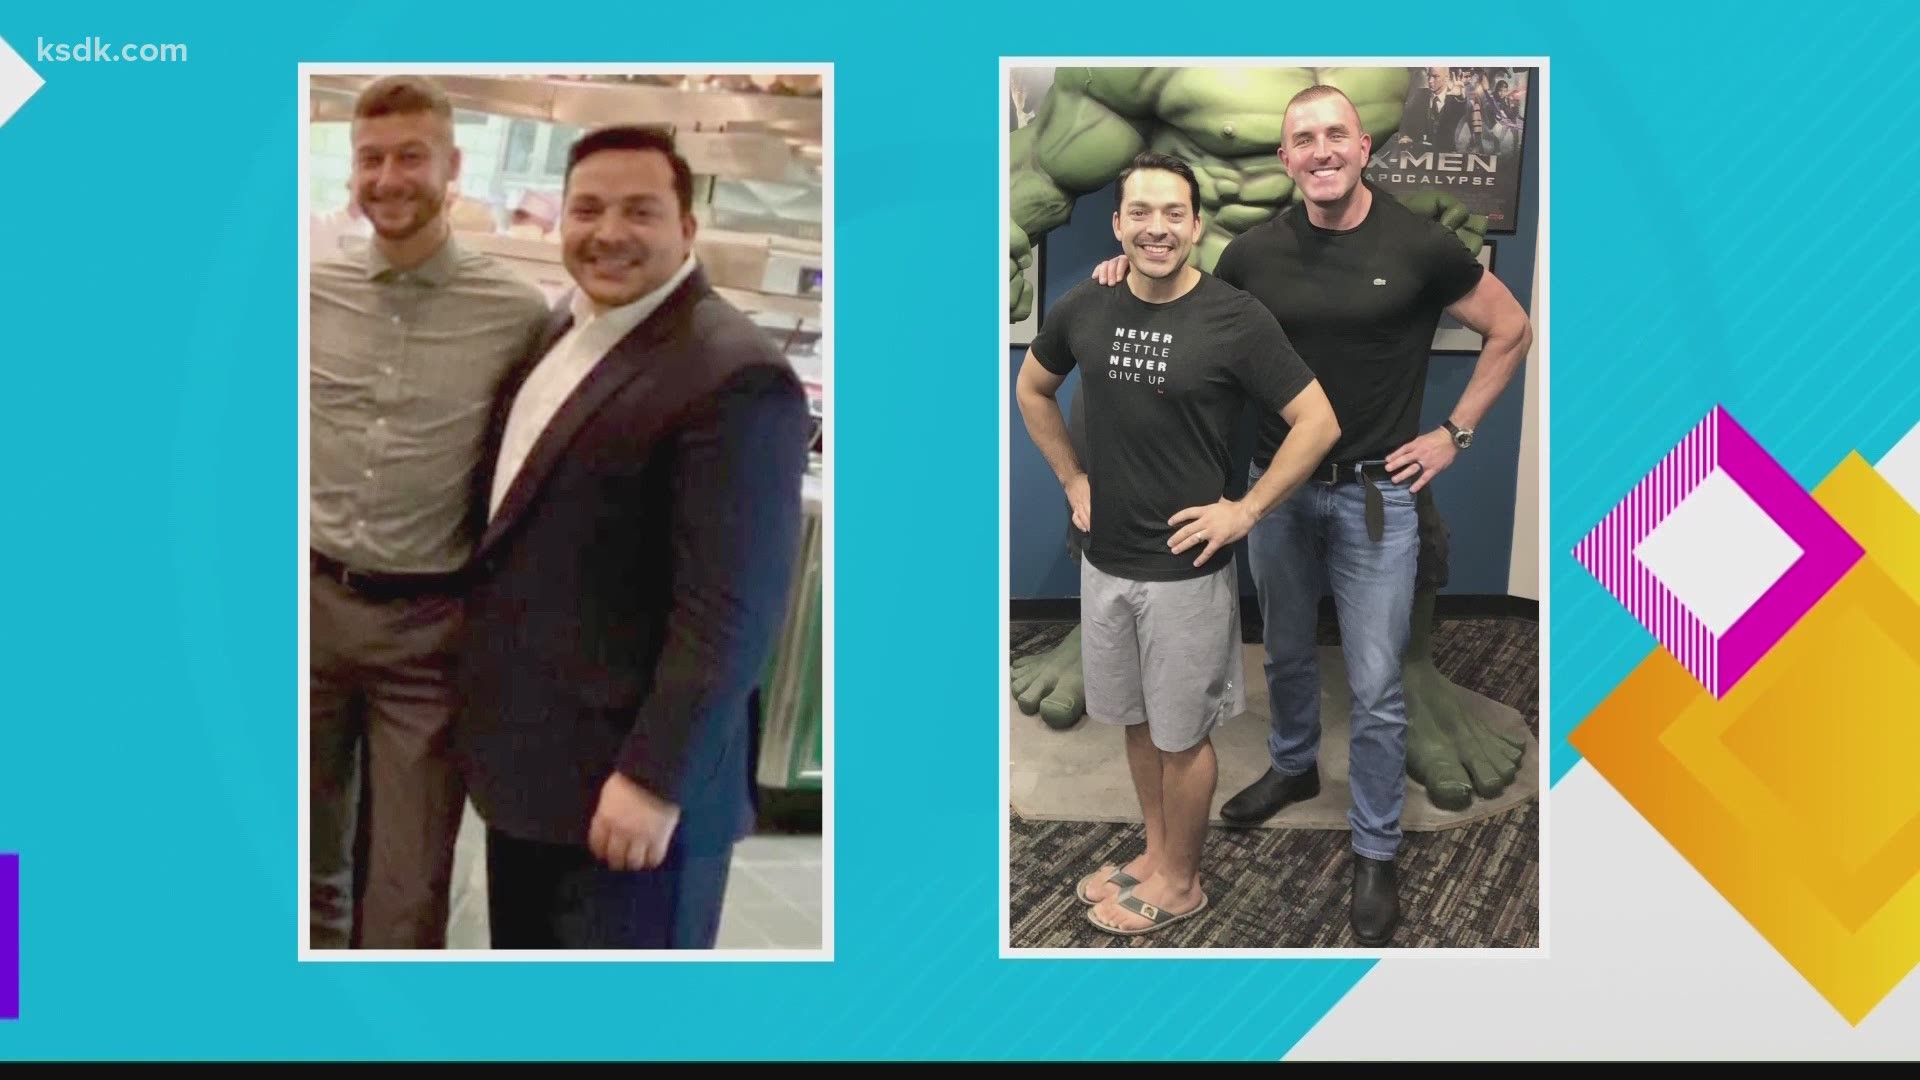 Meet another successful client of Charles D’Angelo who was able to transforms their outlook on life.